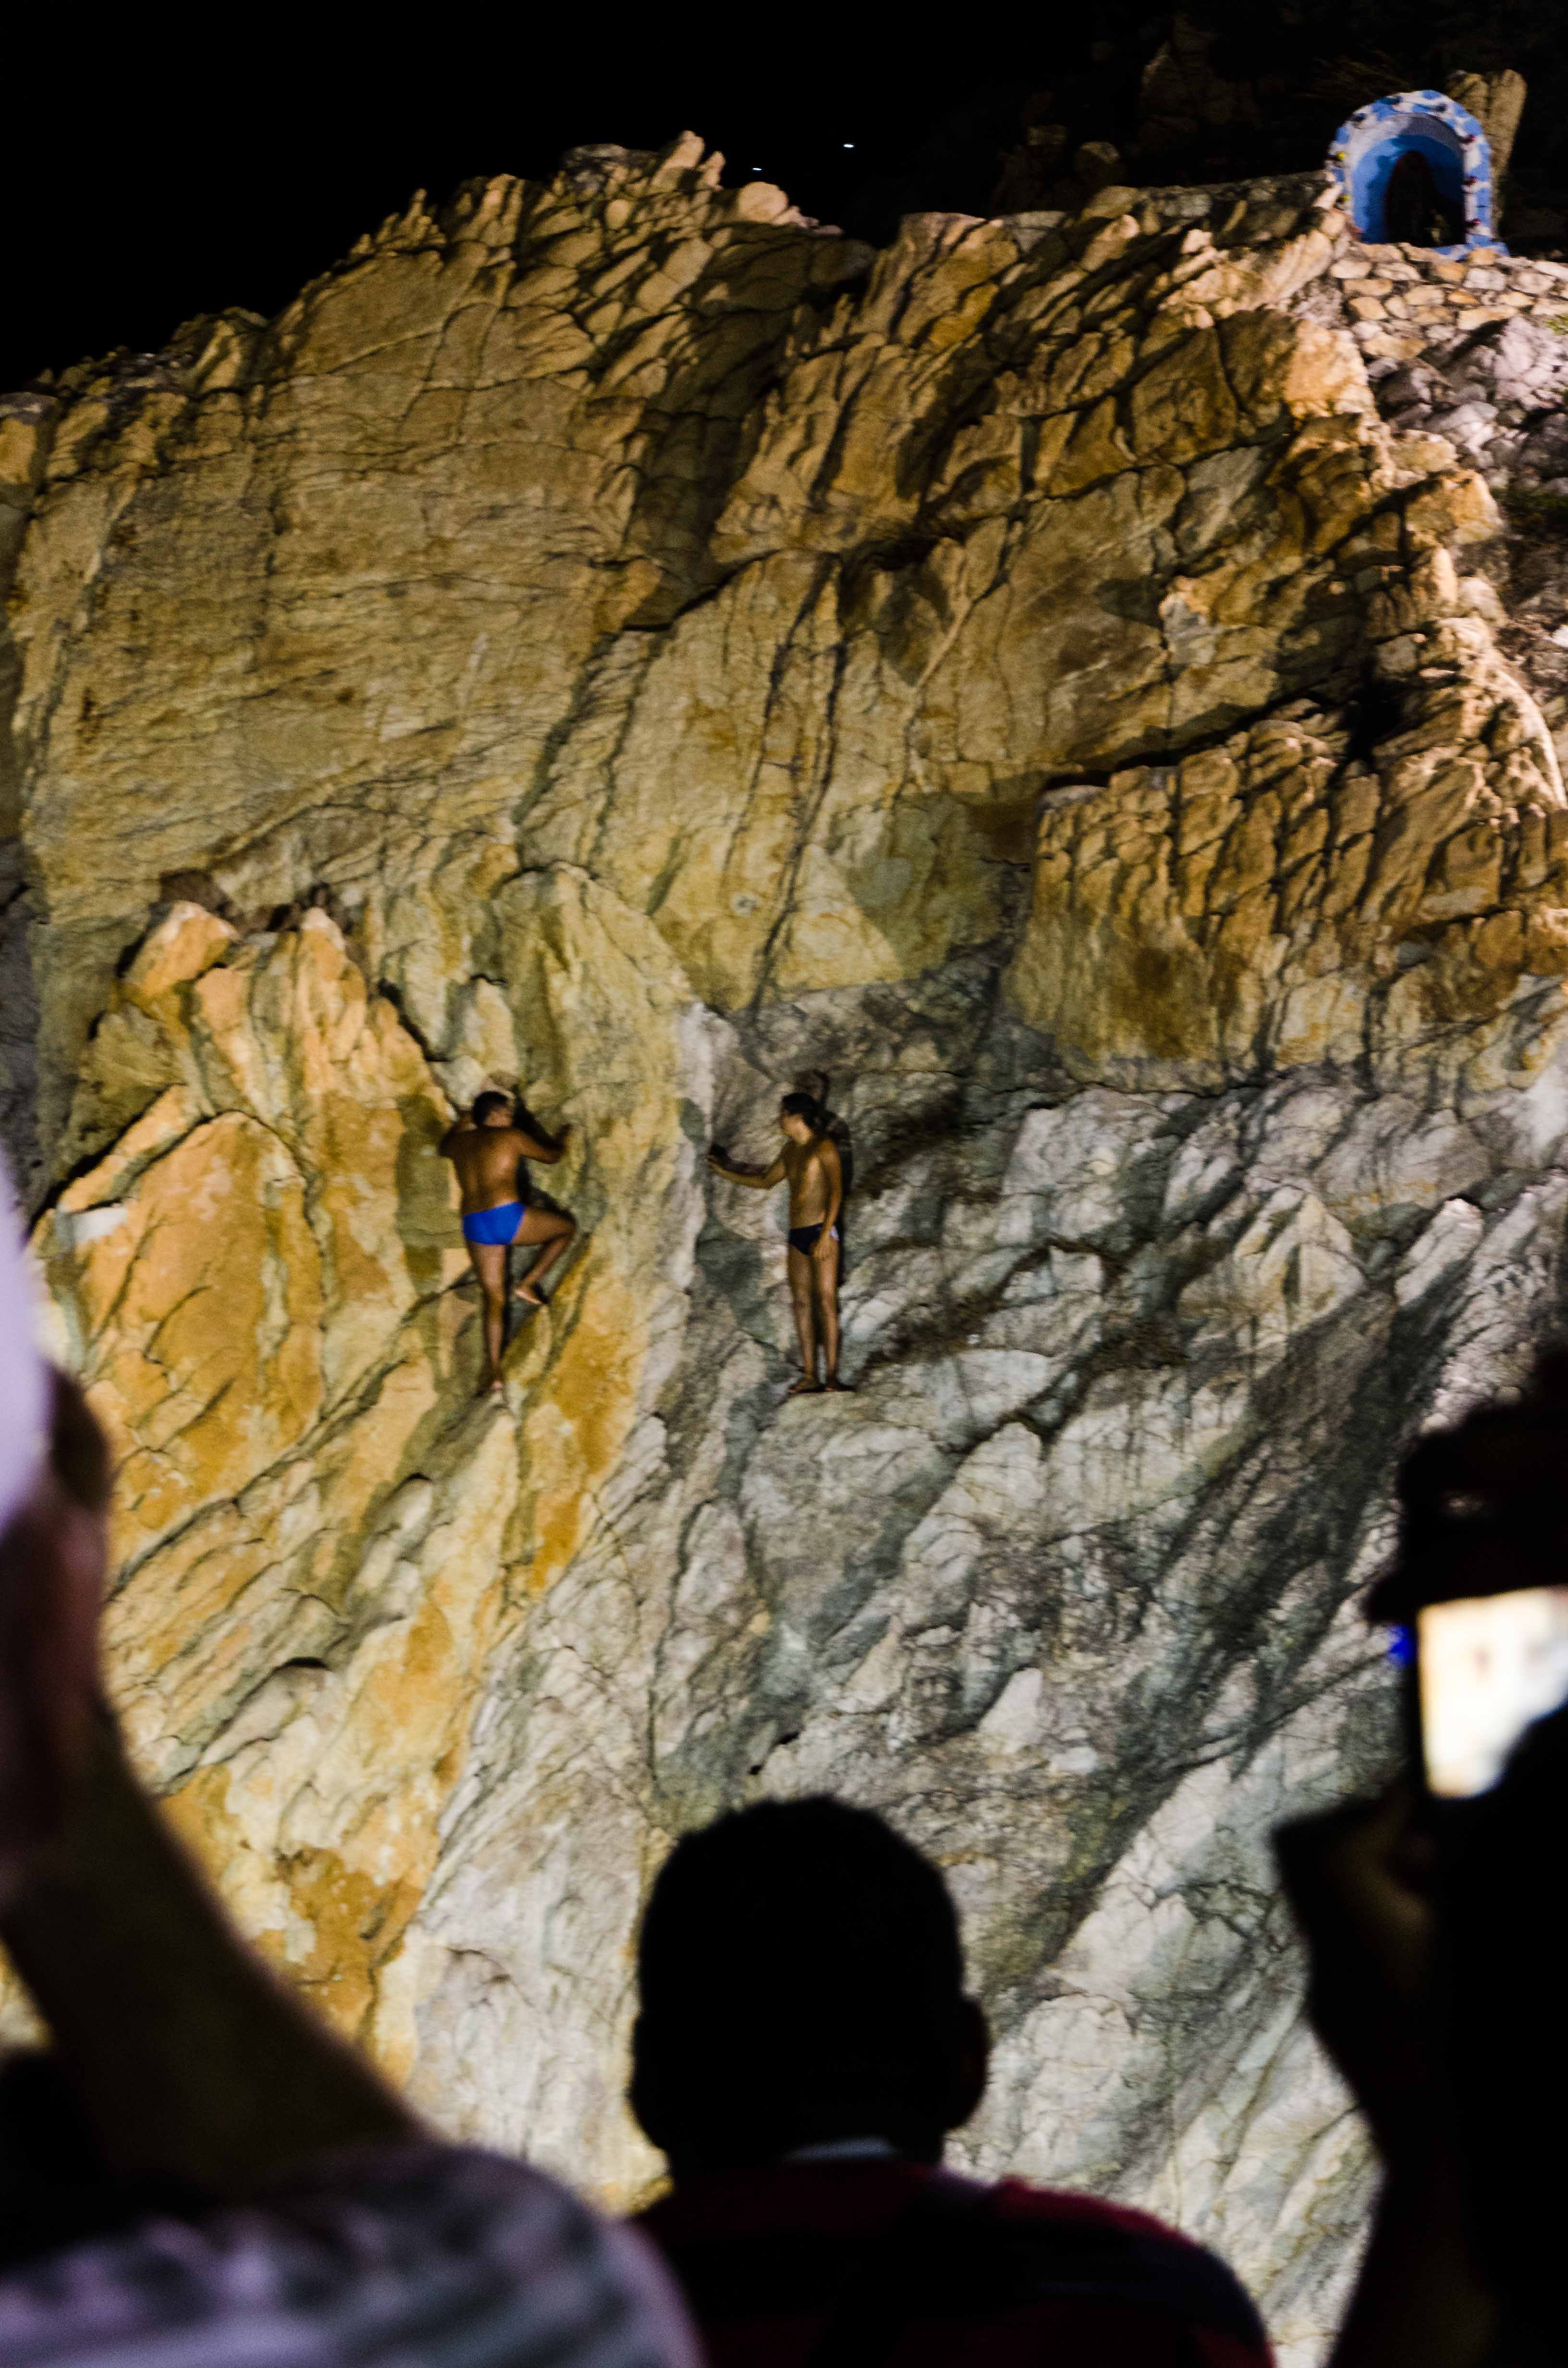 The Famous Clavadistas of Acapulco, climbing 30 meters up a cliff face